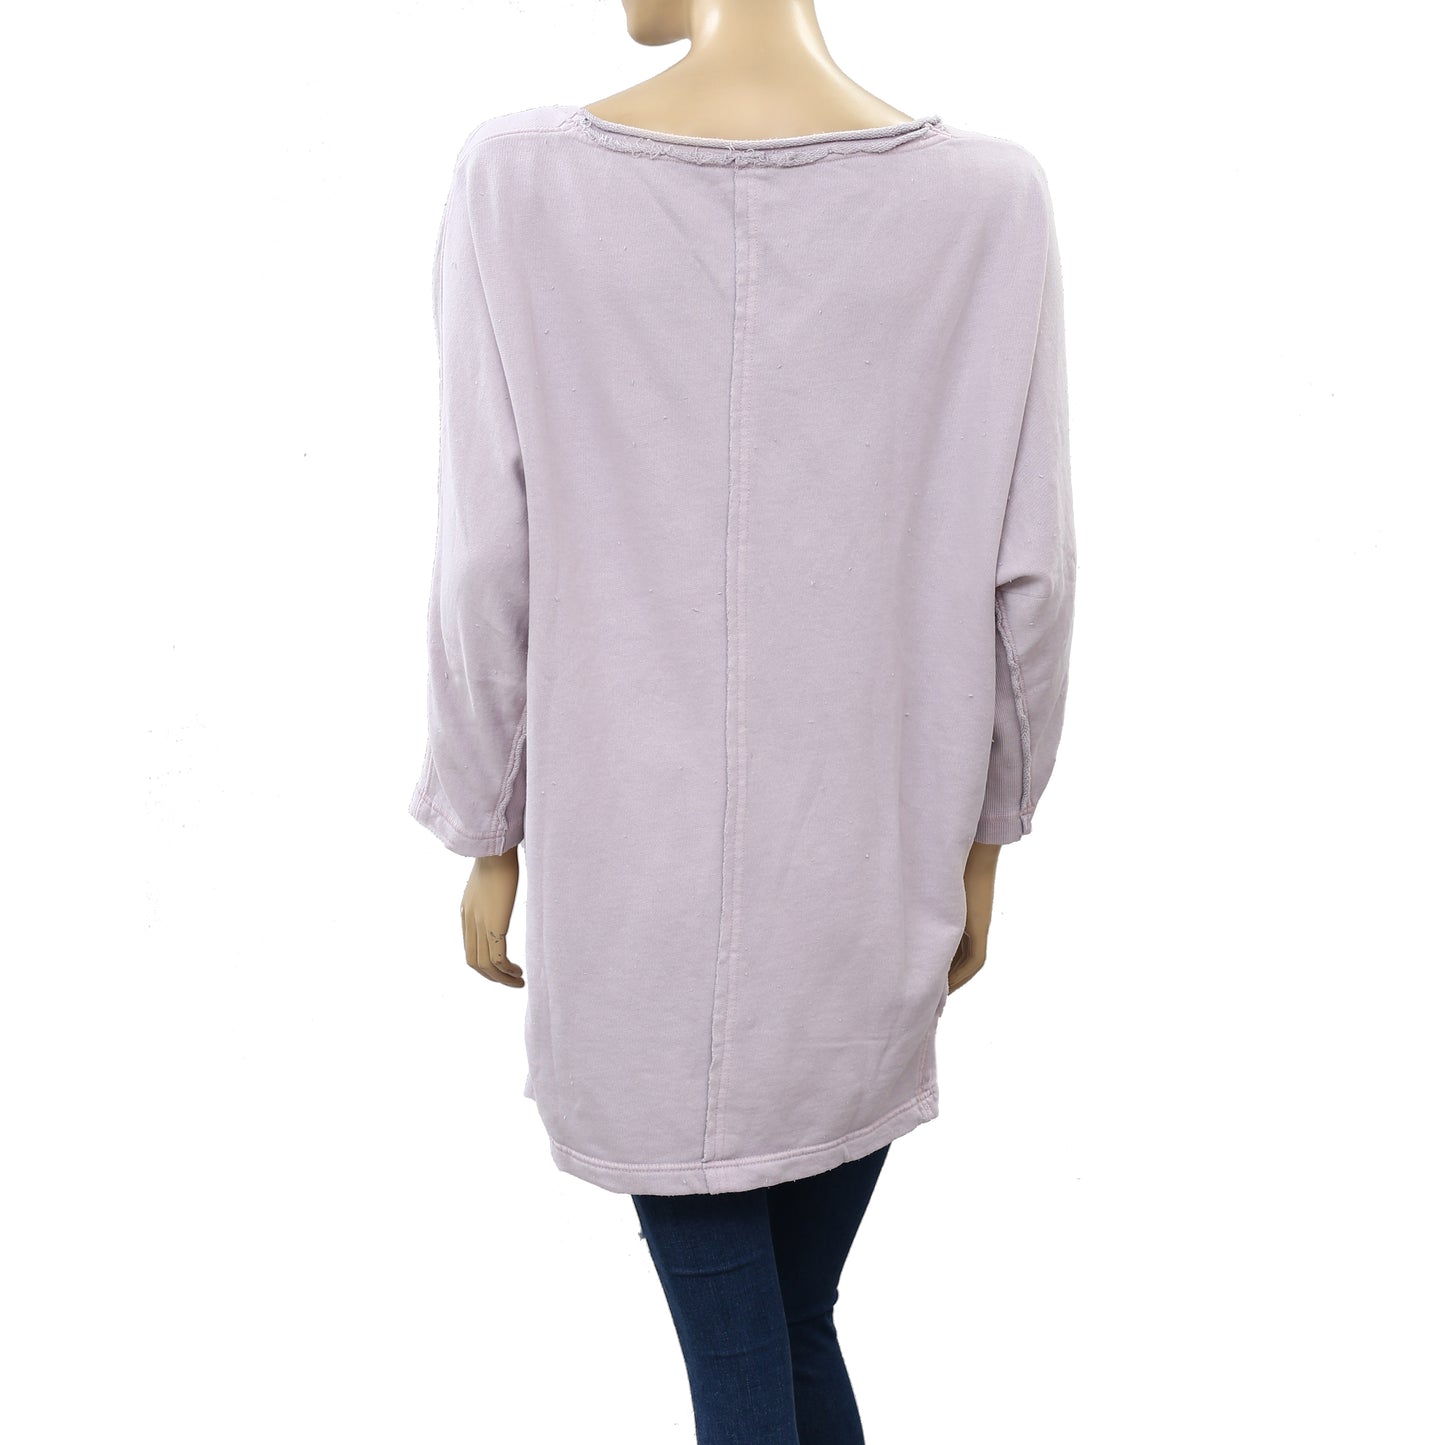 Free People Stevie Oversized Tunic Top